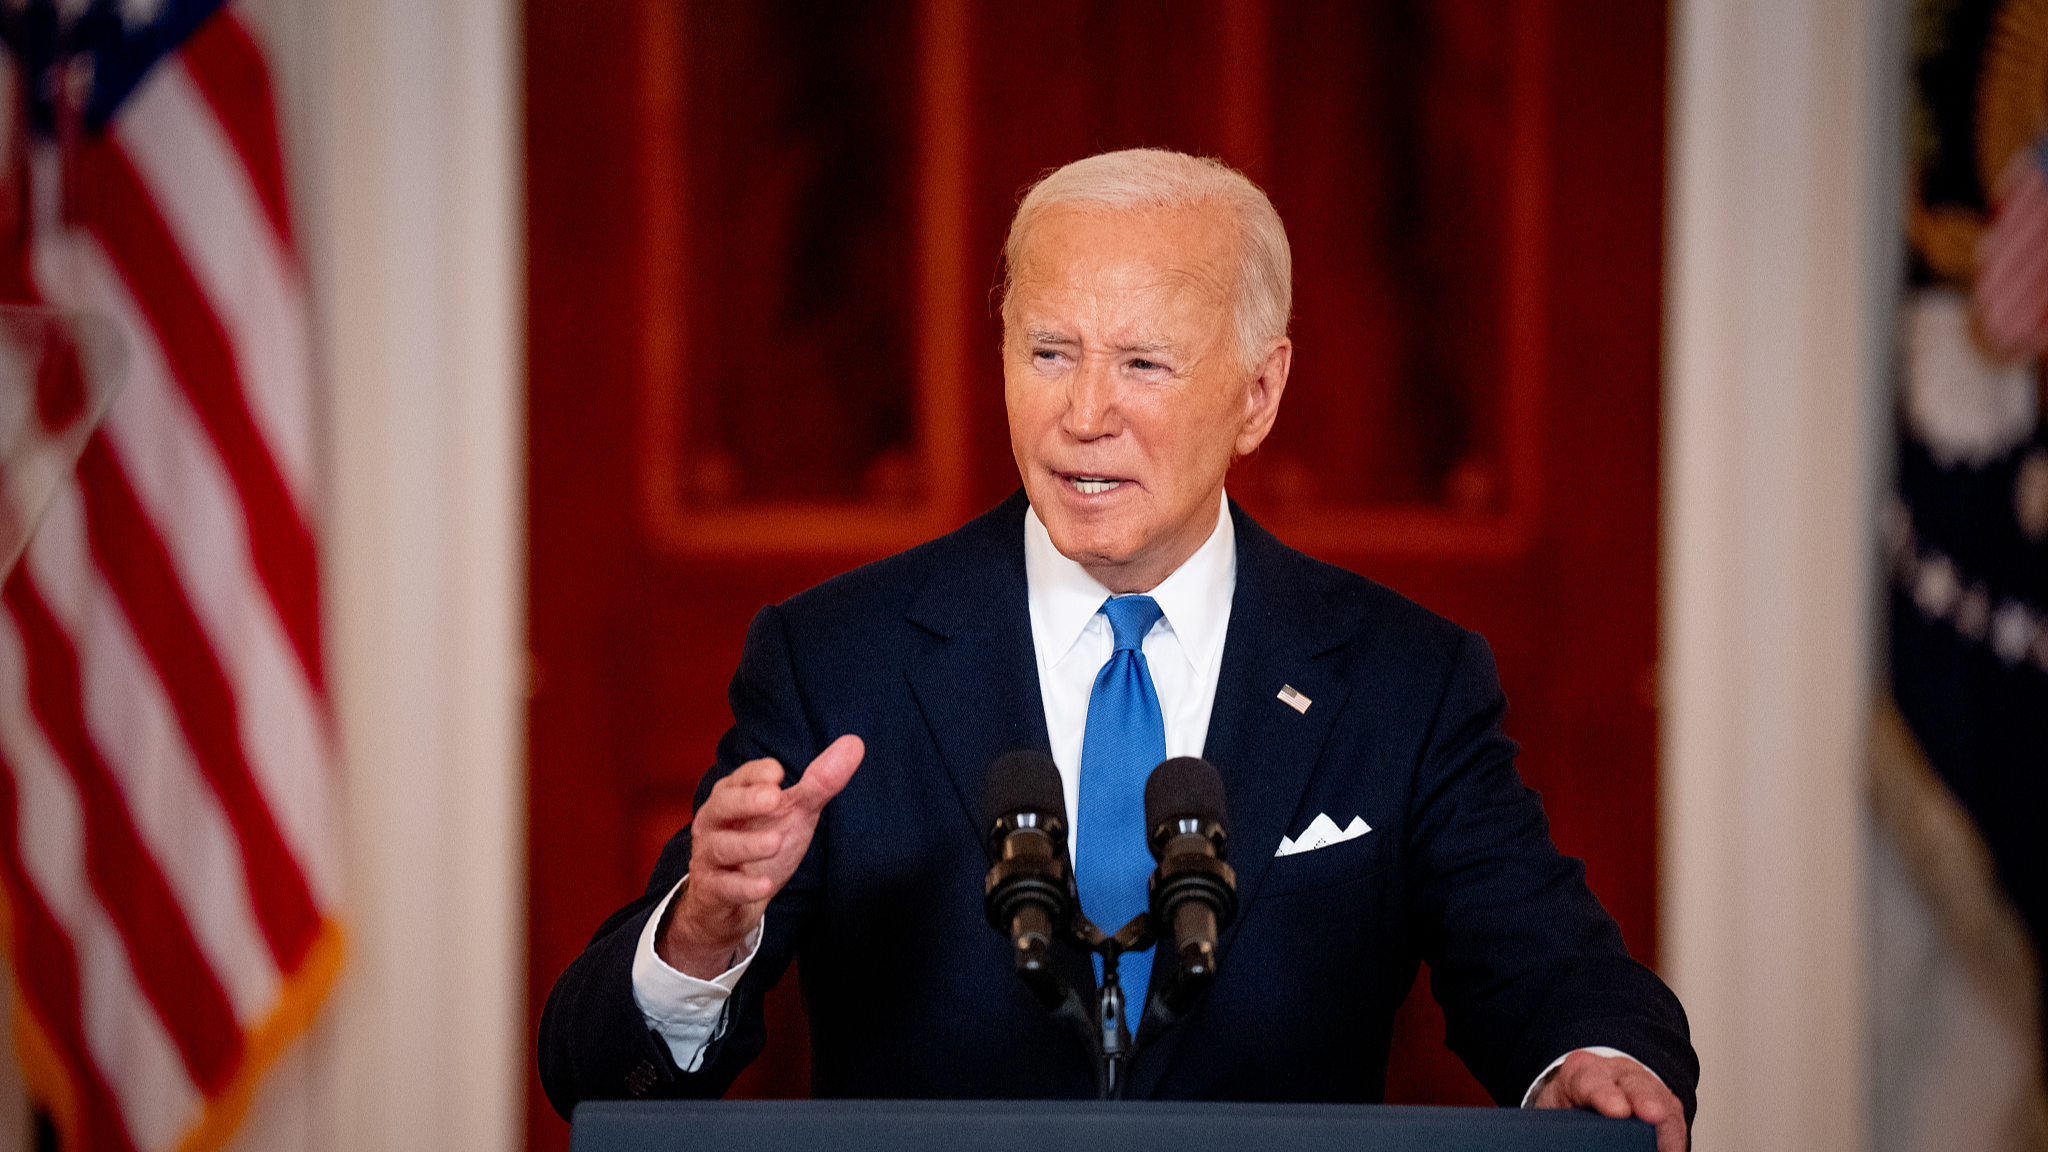 U.S. President Joe Biden speaks to the media following the Supreme Court's ruling on charges against former President Donald Trump that he sought to subvert the 2020 election, at the White House in Washington, D.C., U.S., July 1, 2024. /CFP